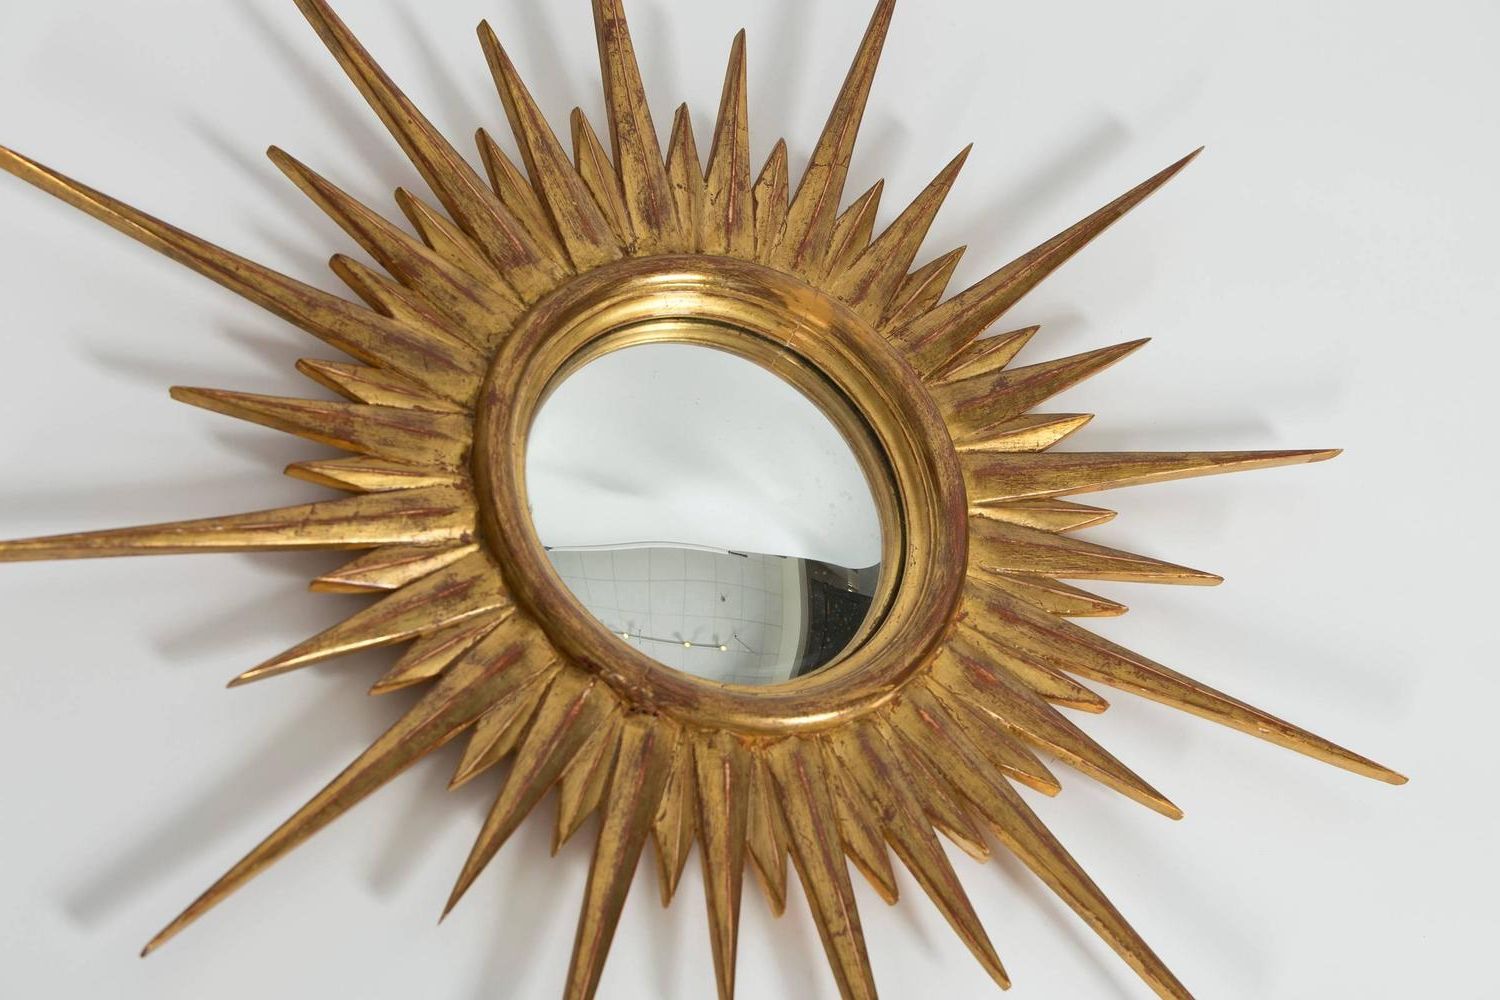 Famous Ring Shield Gold Leaf Wall Mirrors With Antique Gold Leaf Sunburst Mirror At 1stdibs (View 6 of 15)